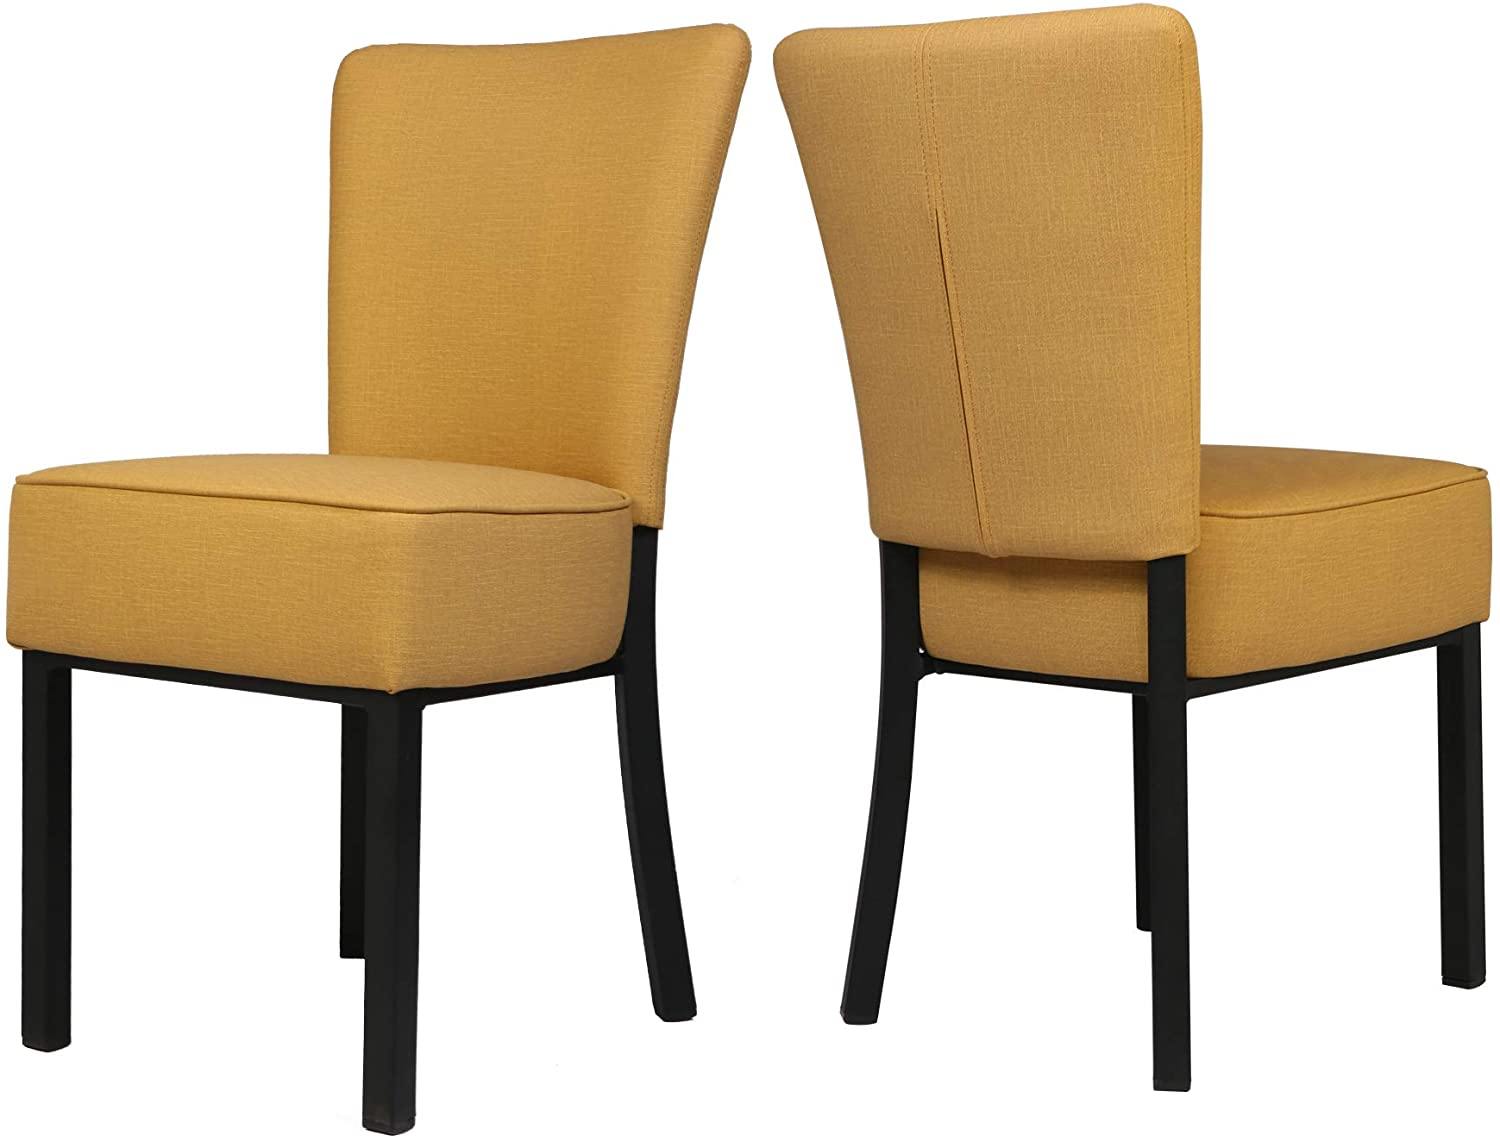 Set of 2 Upholstered Dining Chairs PU Leather Dining Room Side Chairs - Bosonshop